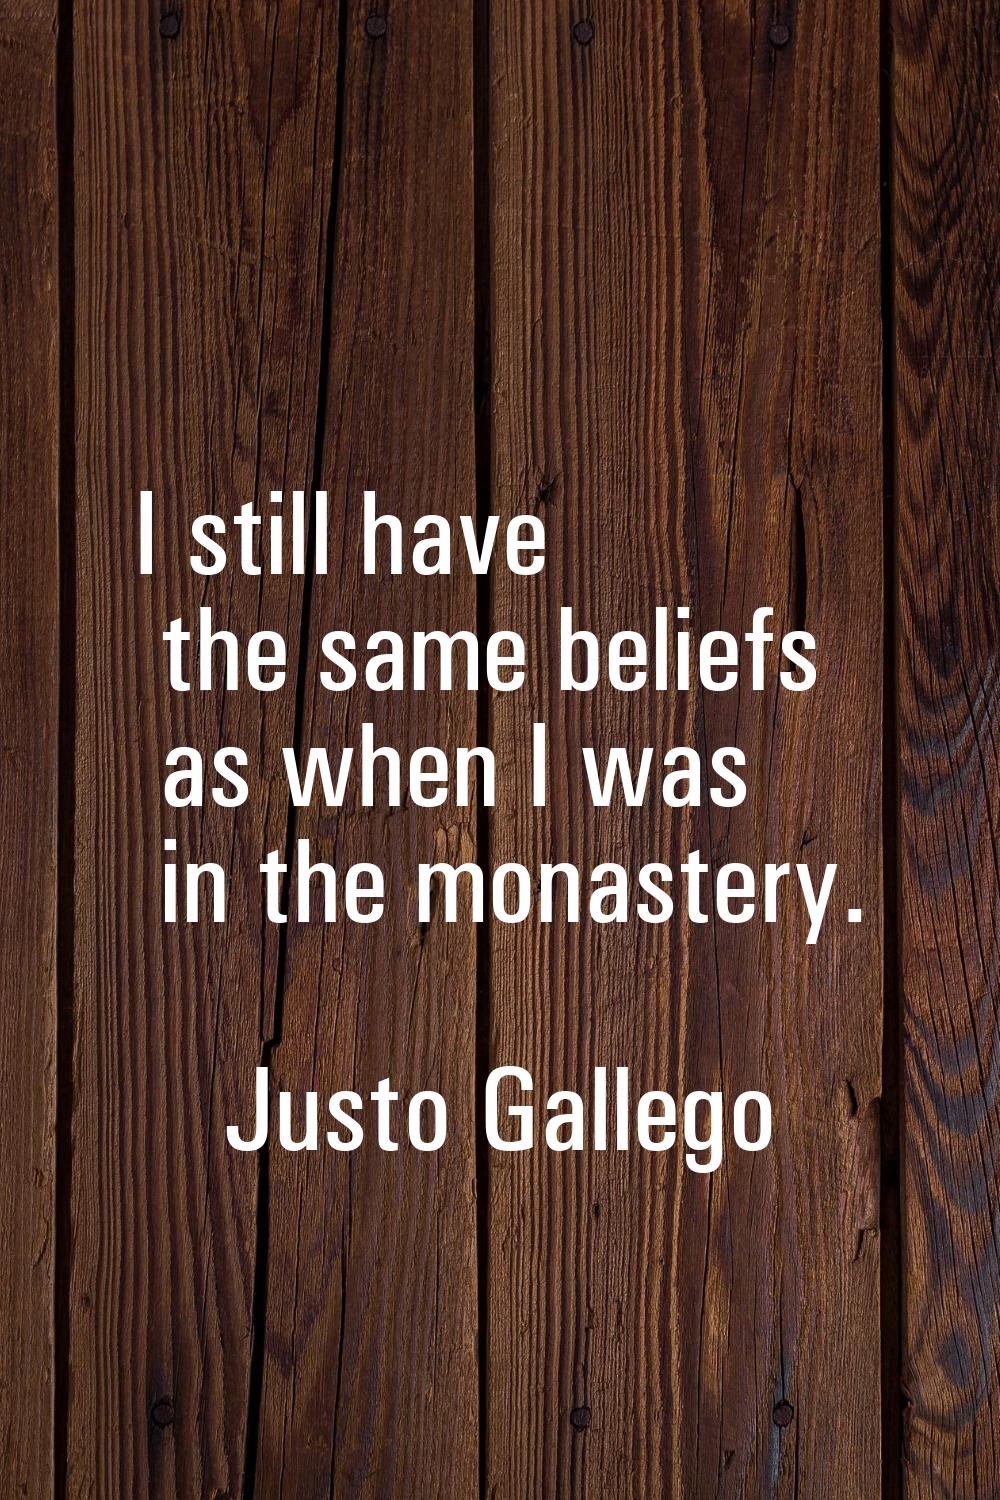 I still have the same beliefs as when I was in the monastery.